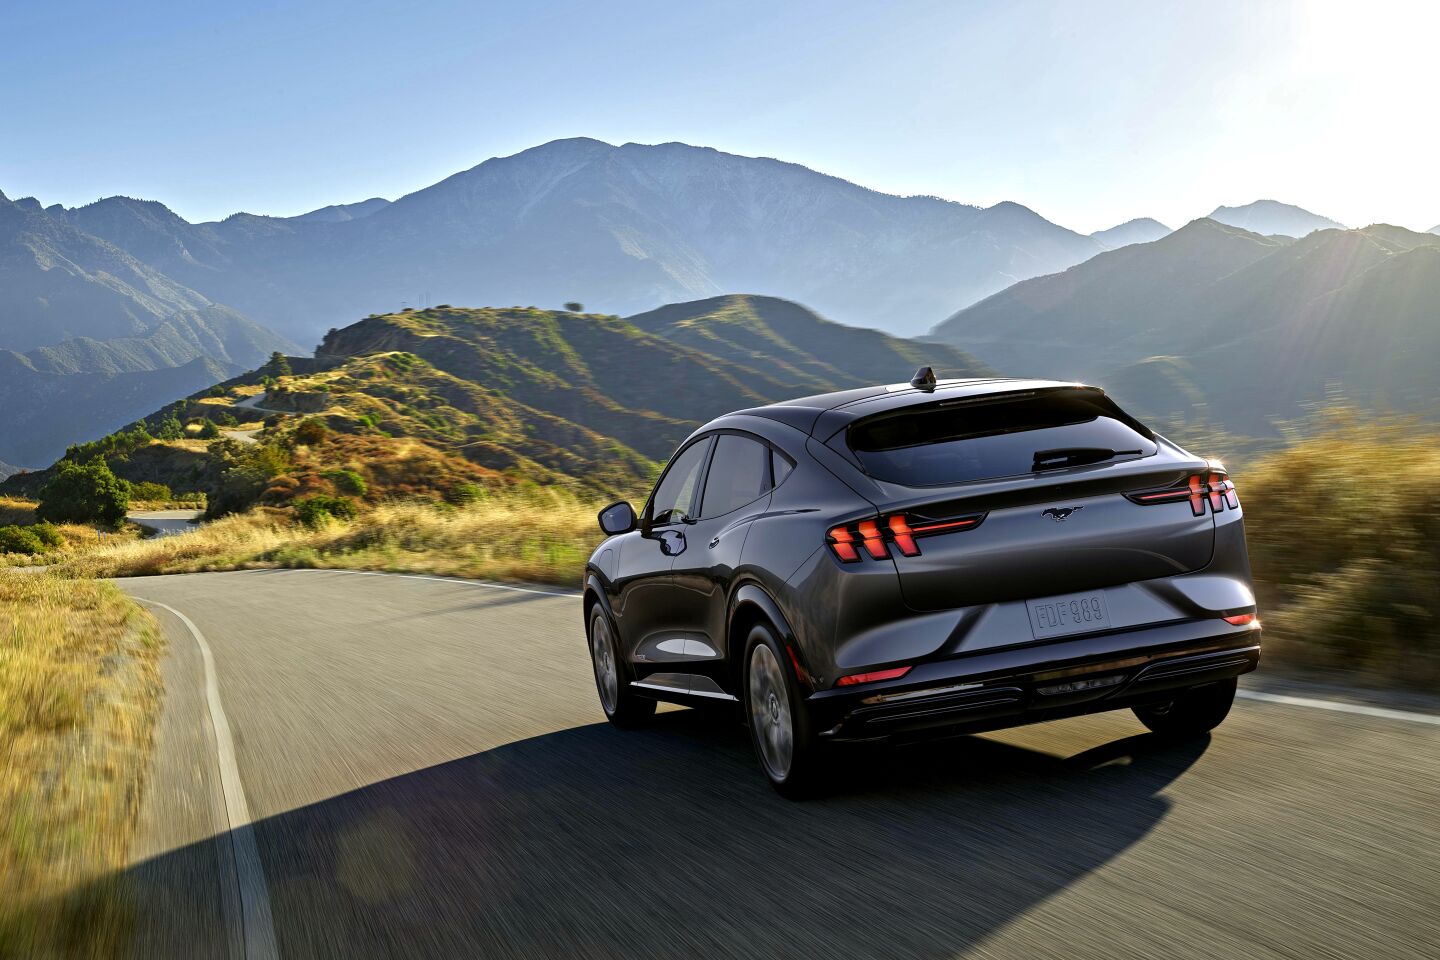 Ford unveils its Mustang Mach-E electric SUV